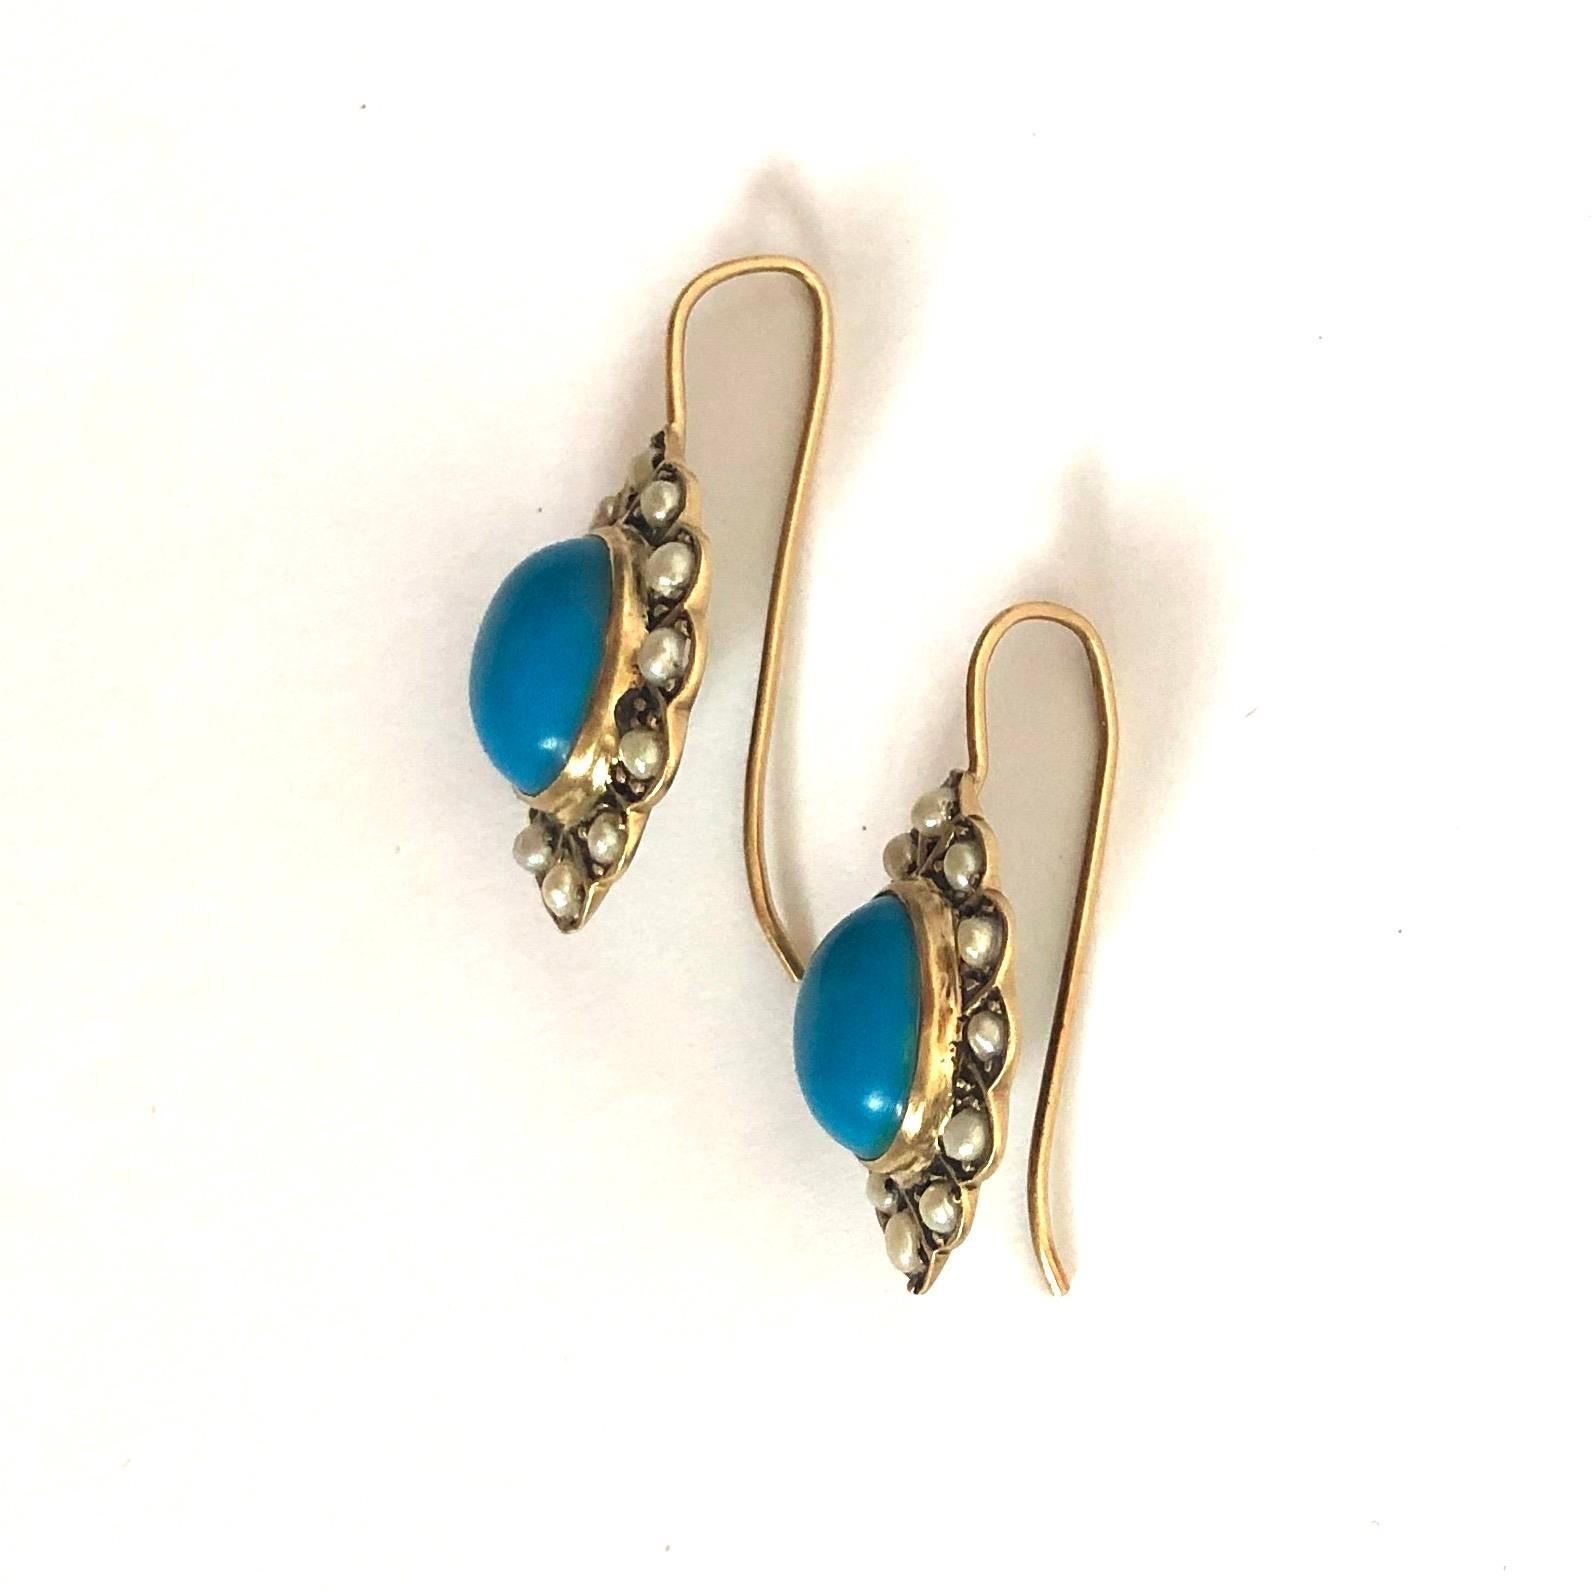 The bright blue turquoise stones are surrounded by a border of pearls and are set in 9ct gold. The face of the earrings are attached to shepherd hooks. 

Face Dimension: 19x14mm 
Drop From Ear: 26mm 

Weight: 3.56g